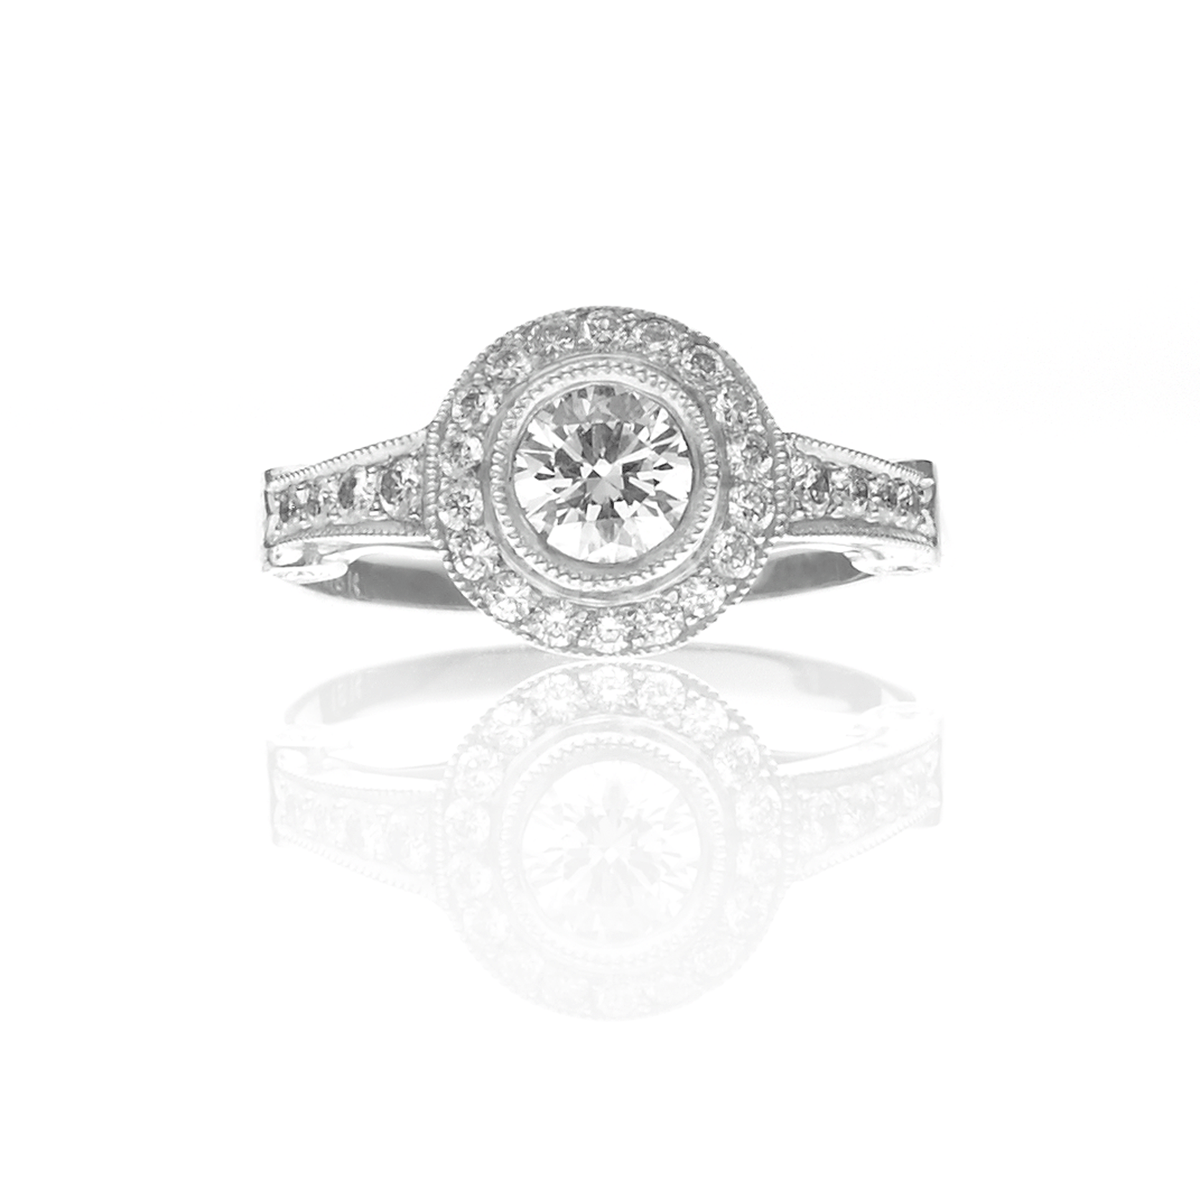 CHRIS AIRE CARAT DIAMOND ENGAGEMENT RING - Chris Aire Fine Jewelry & Timepieces